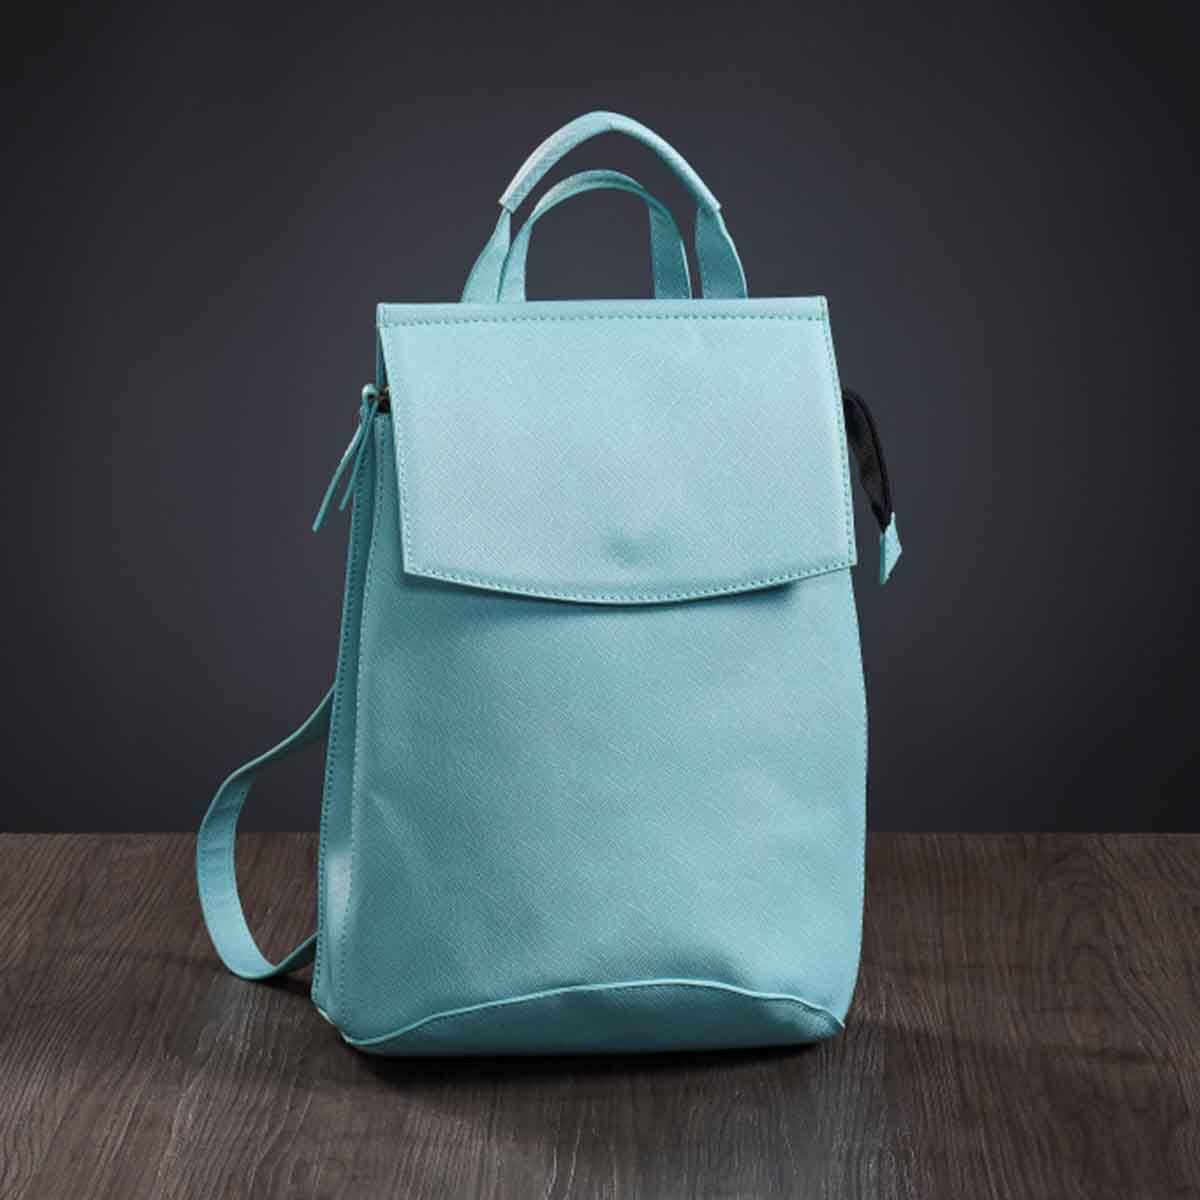 Mona B Convertible Backpack for Offices Schools and Colleges with Stylish Design for Women (Turquoise)